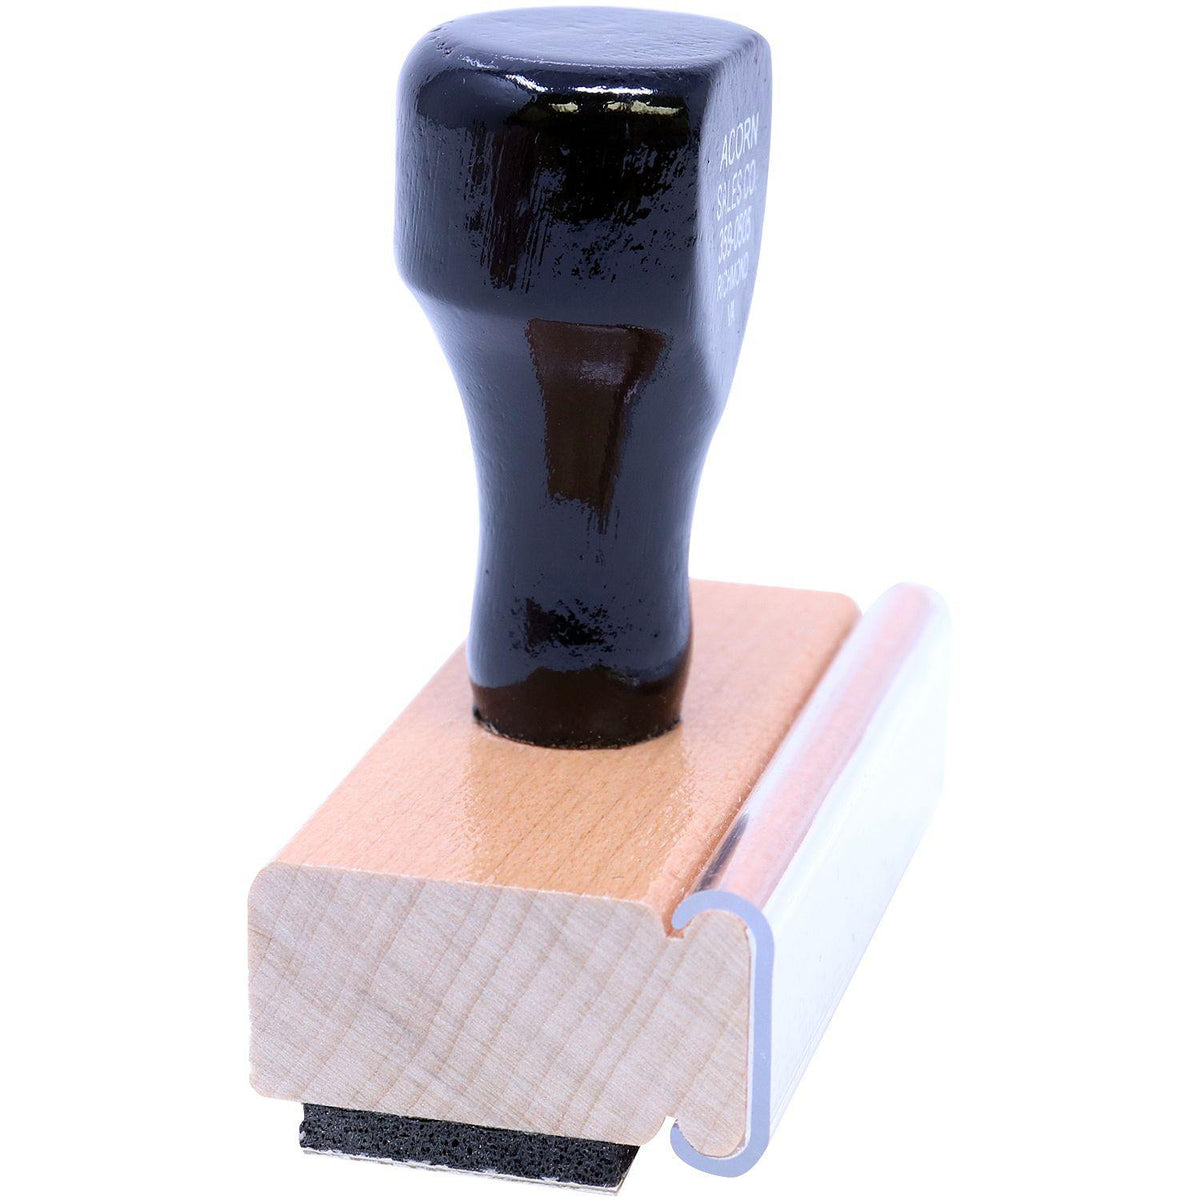 Side View of Large Narrow Font Original Rubber Stamp at an Angle